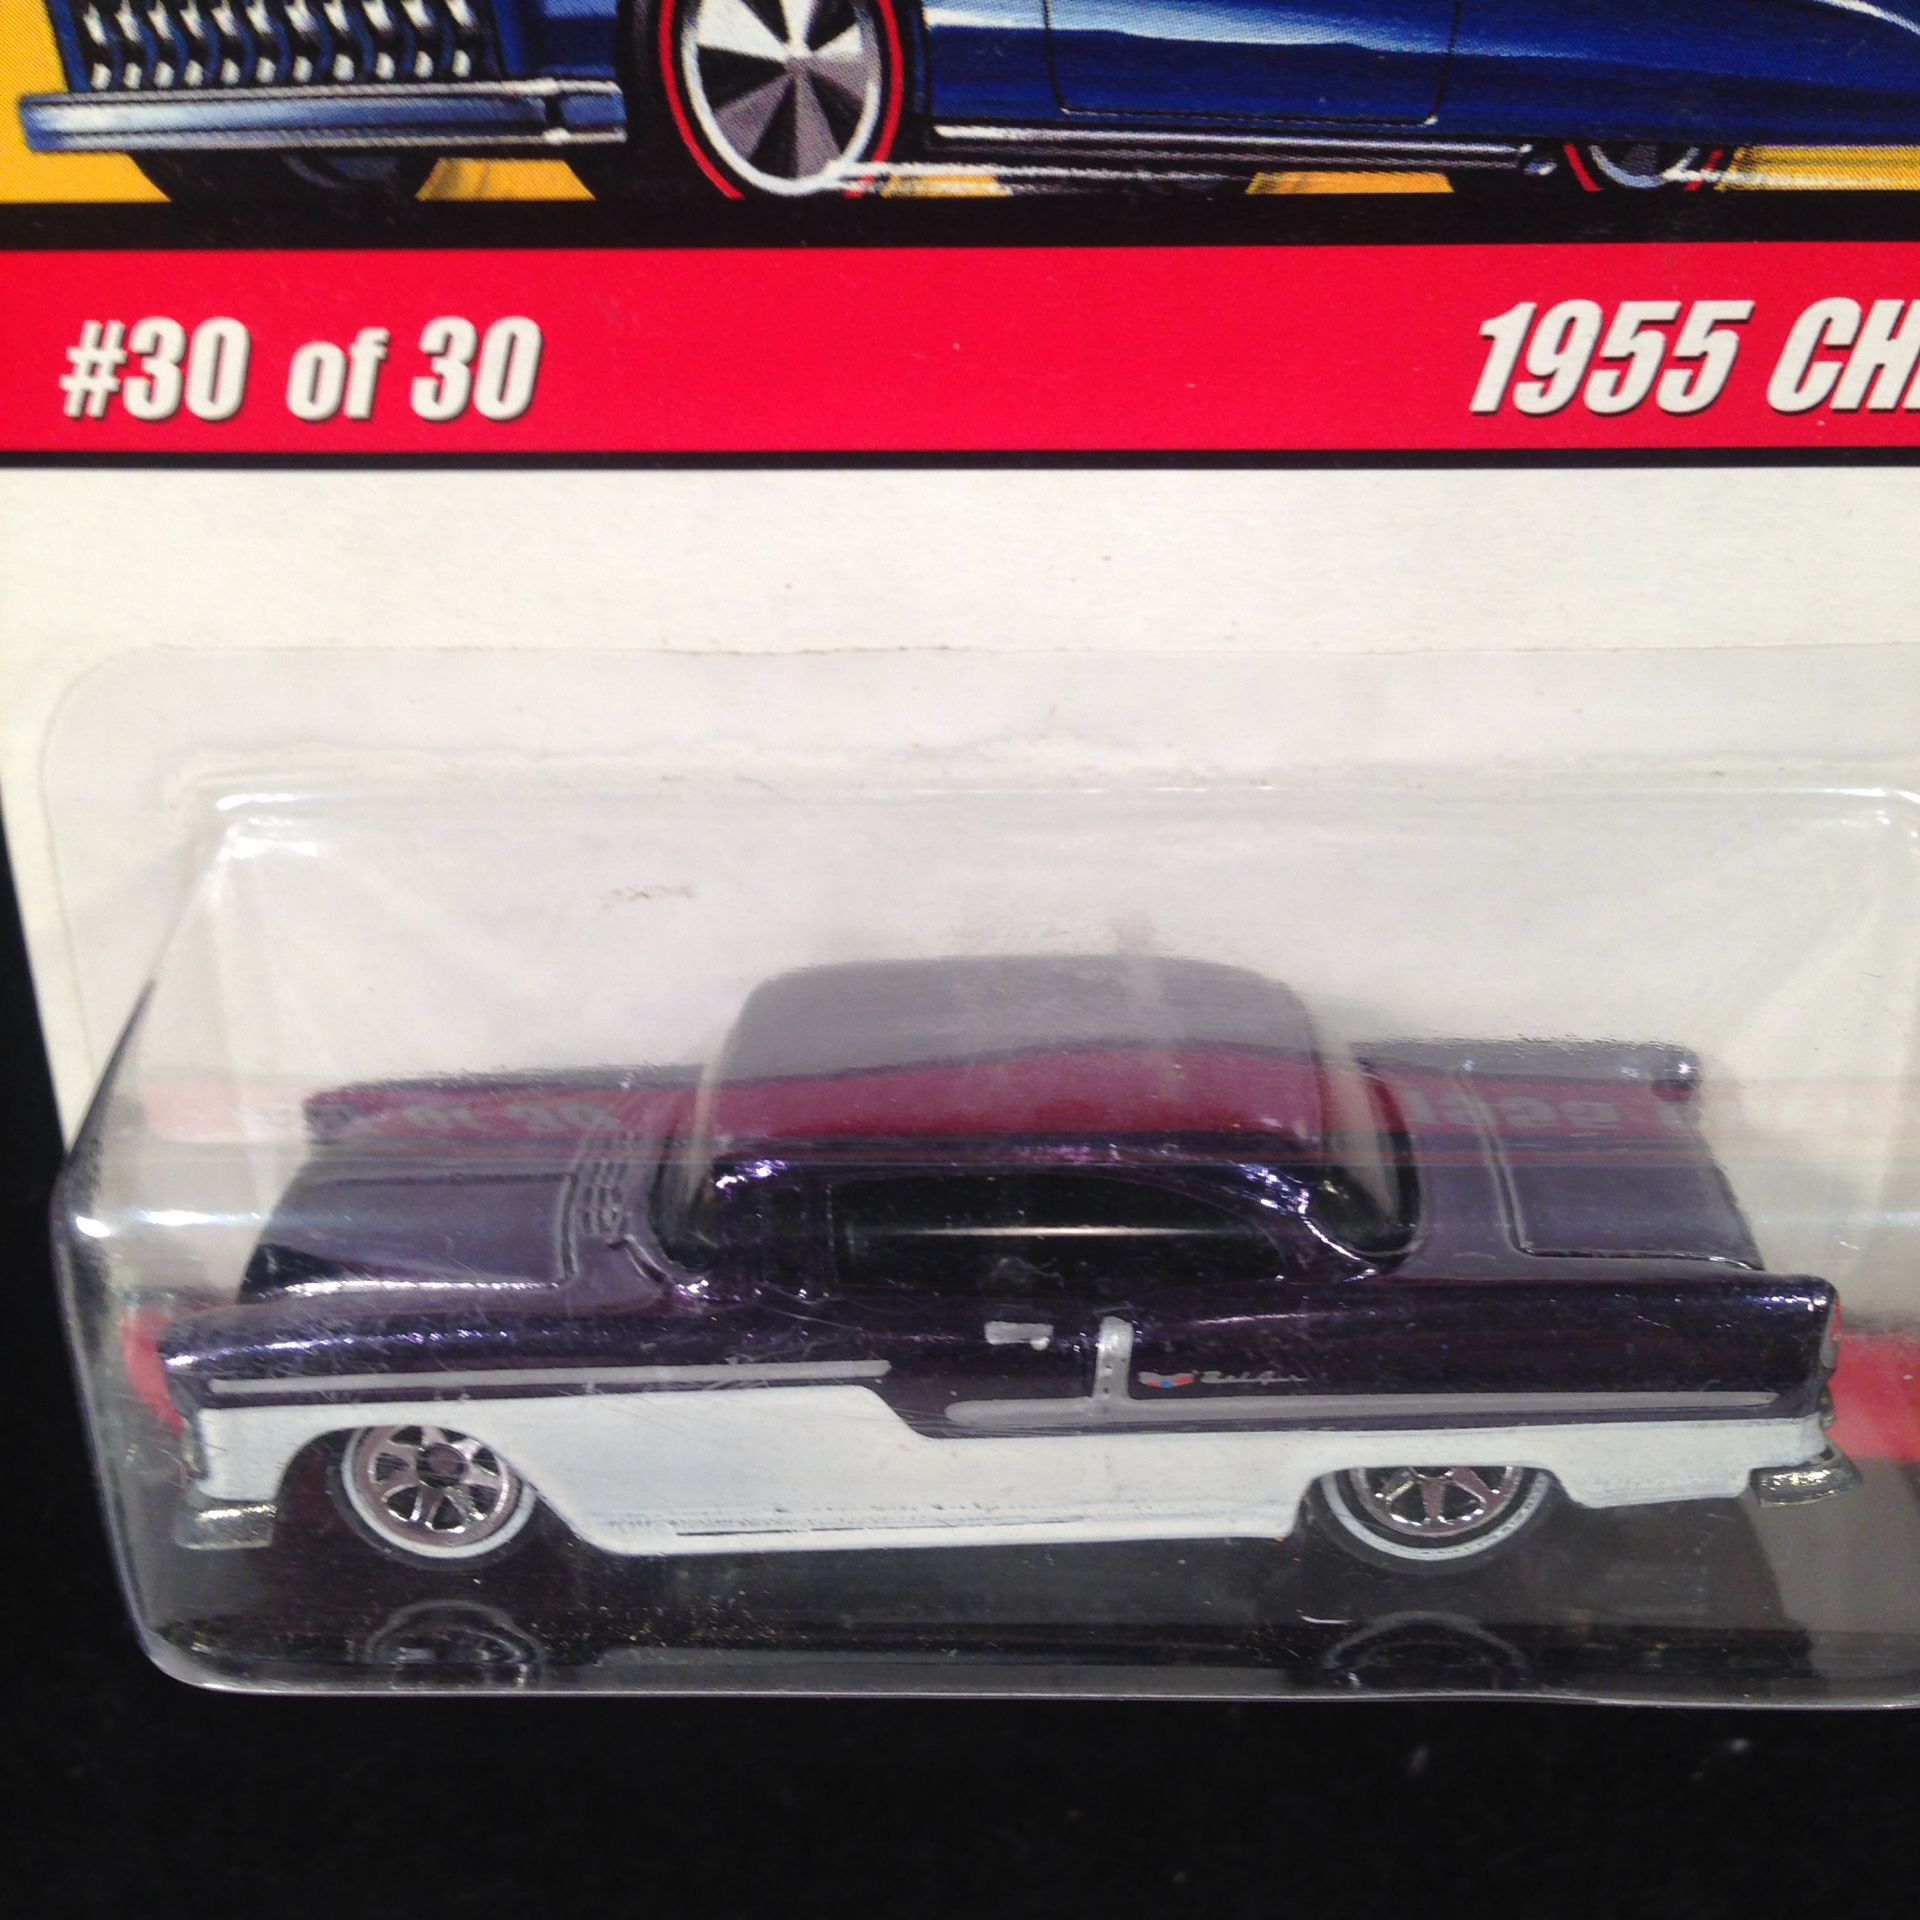 Hot Wheels Classics Series 2 1955 Chevy • Production Error • Reversed In Blister